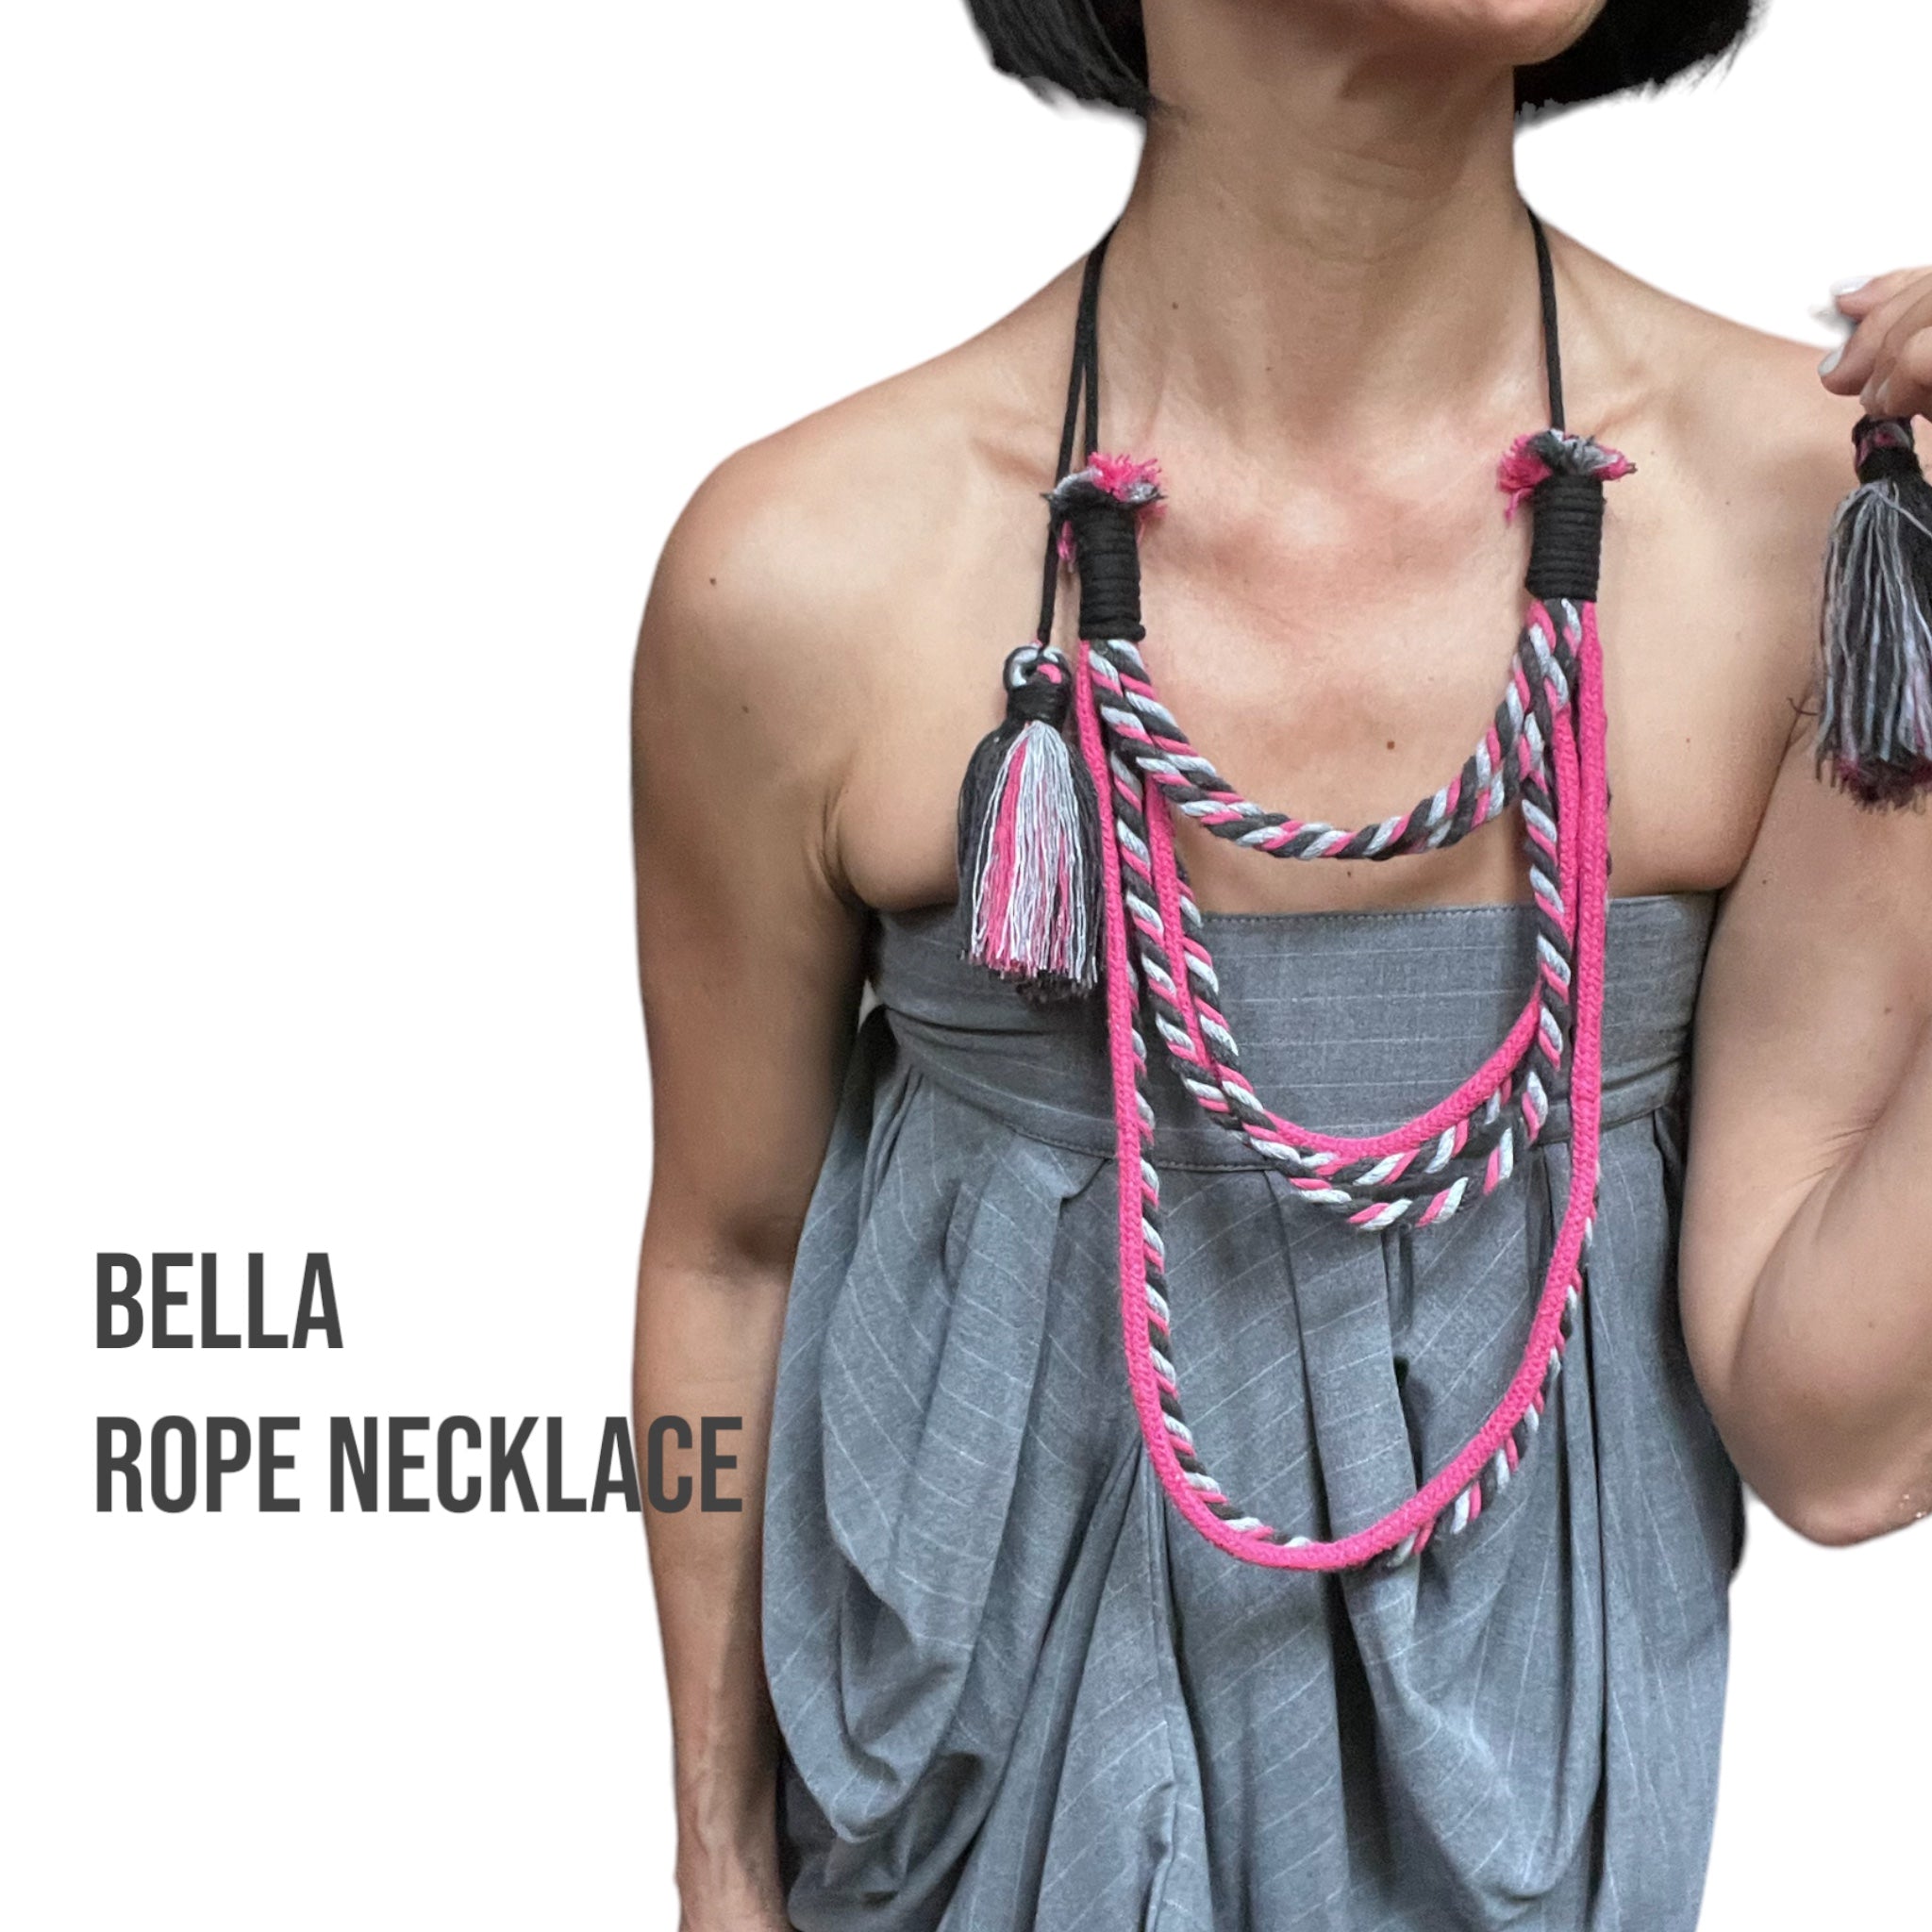 7 Tutorials For Braided Rope Jewelry